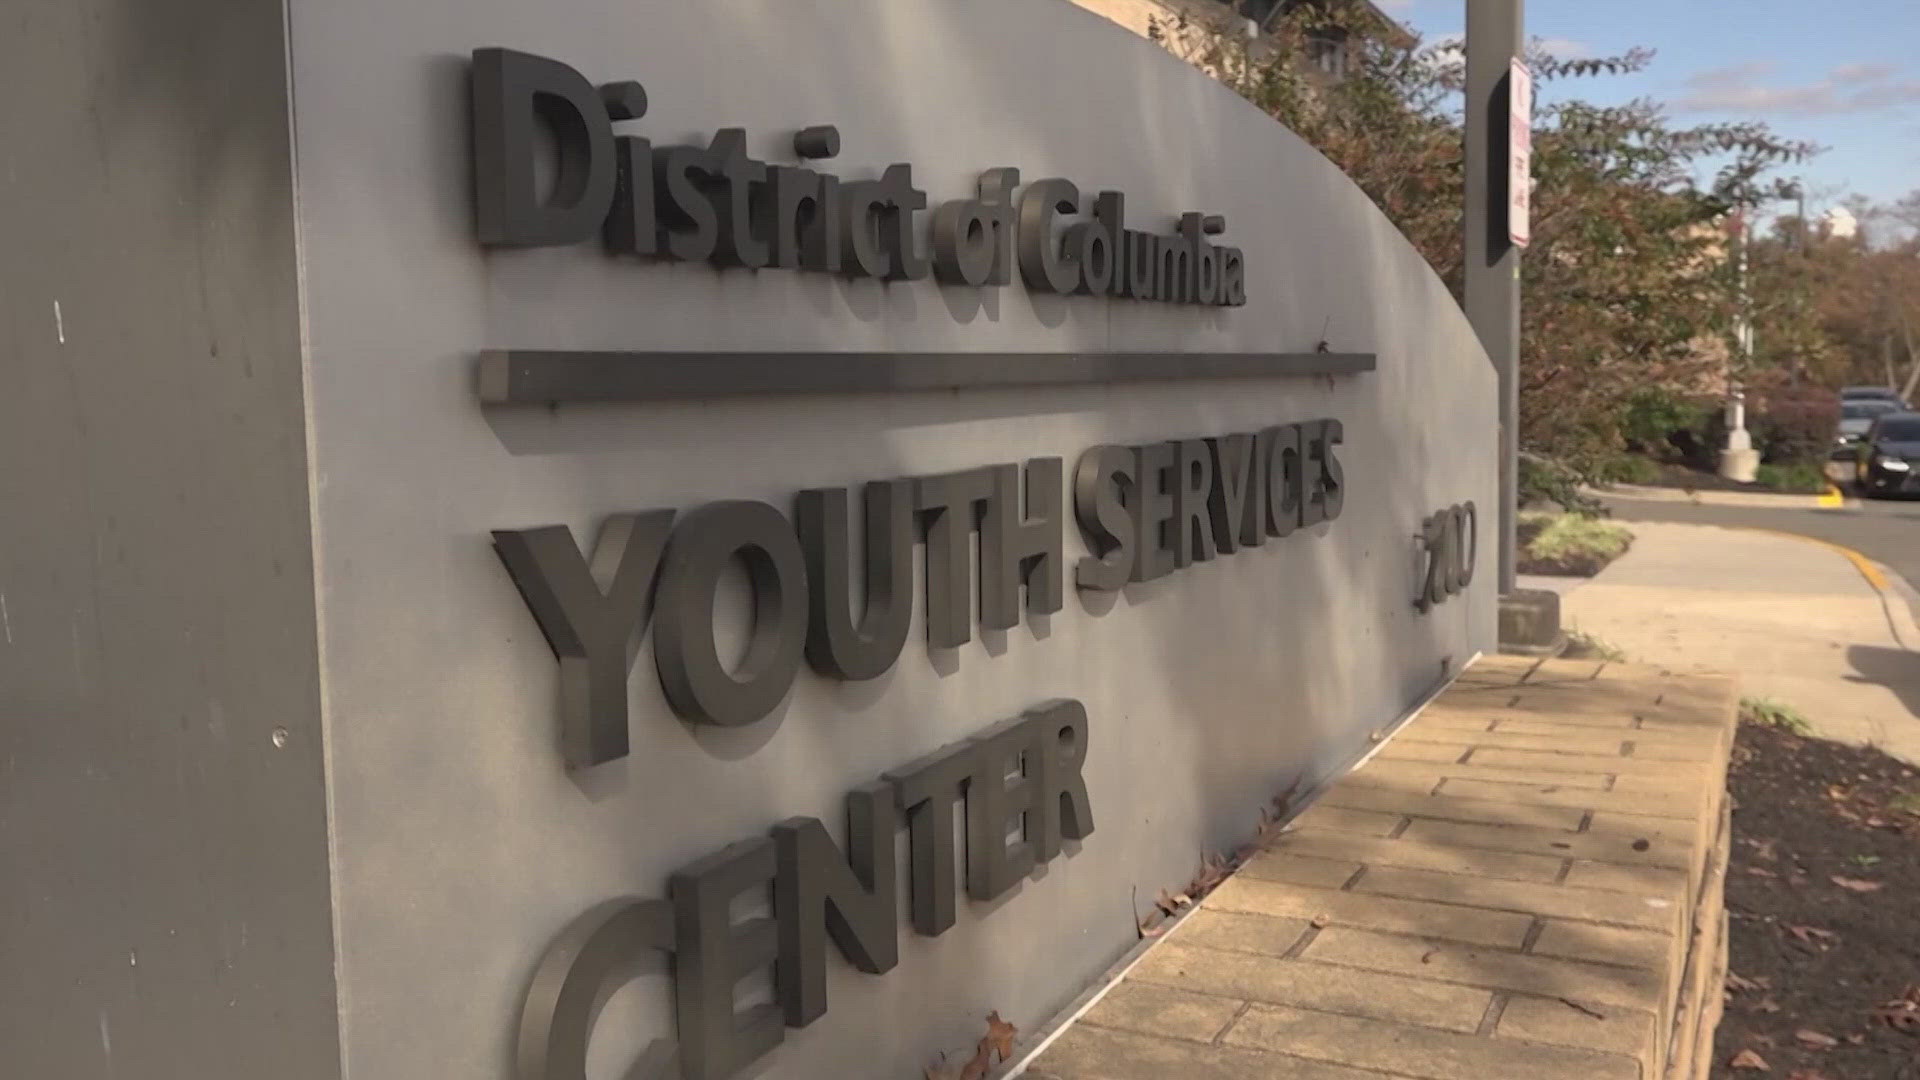 The District's Department of Youth and Rehabilitation Services is under fire over allegations of fights, sexual assaults and drugs in their youth facilities.